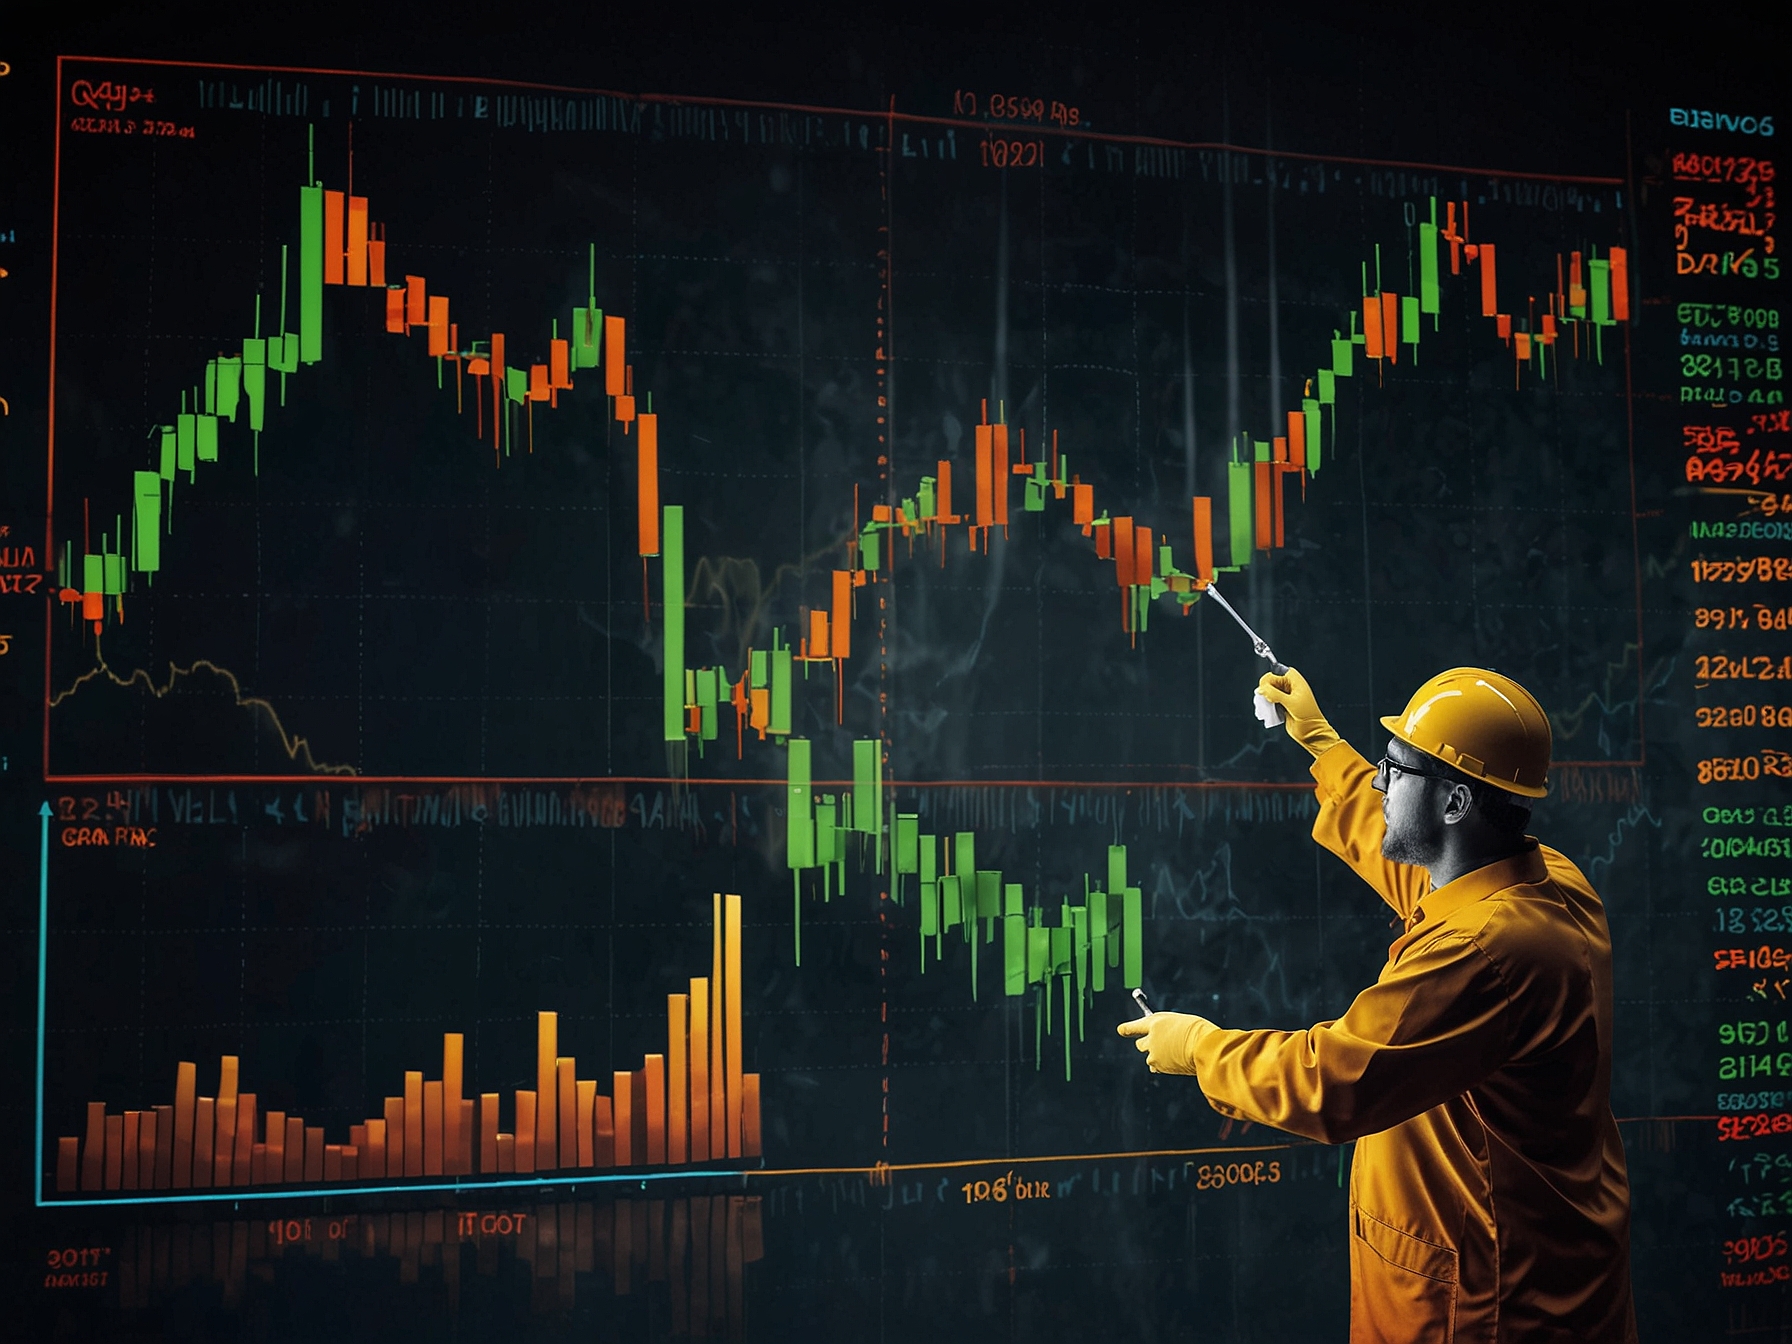 Stock market illustration with a focus on the energy sector's rebound. Rising oil prices and a surge in oil-related stocks are highlighted against a backdrop of broader market decline.